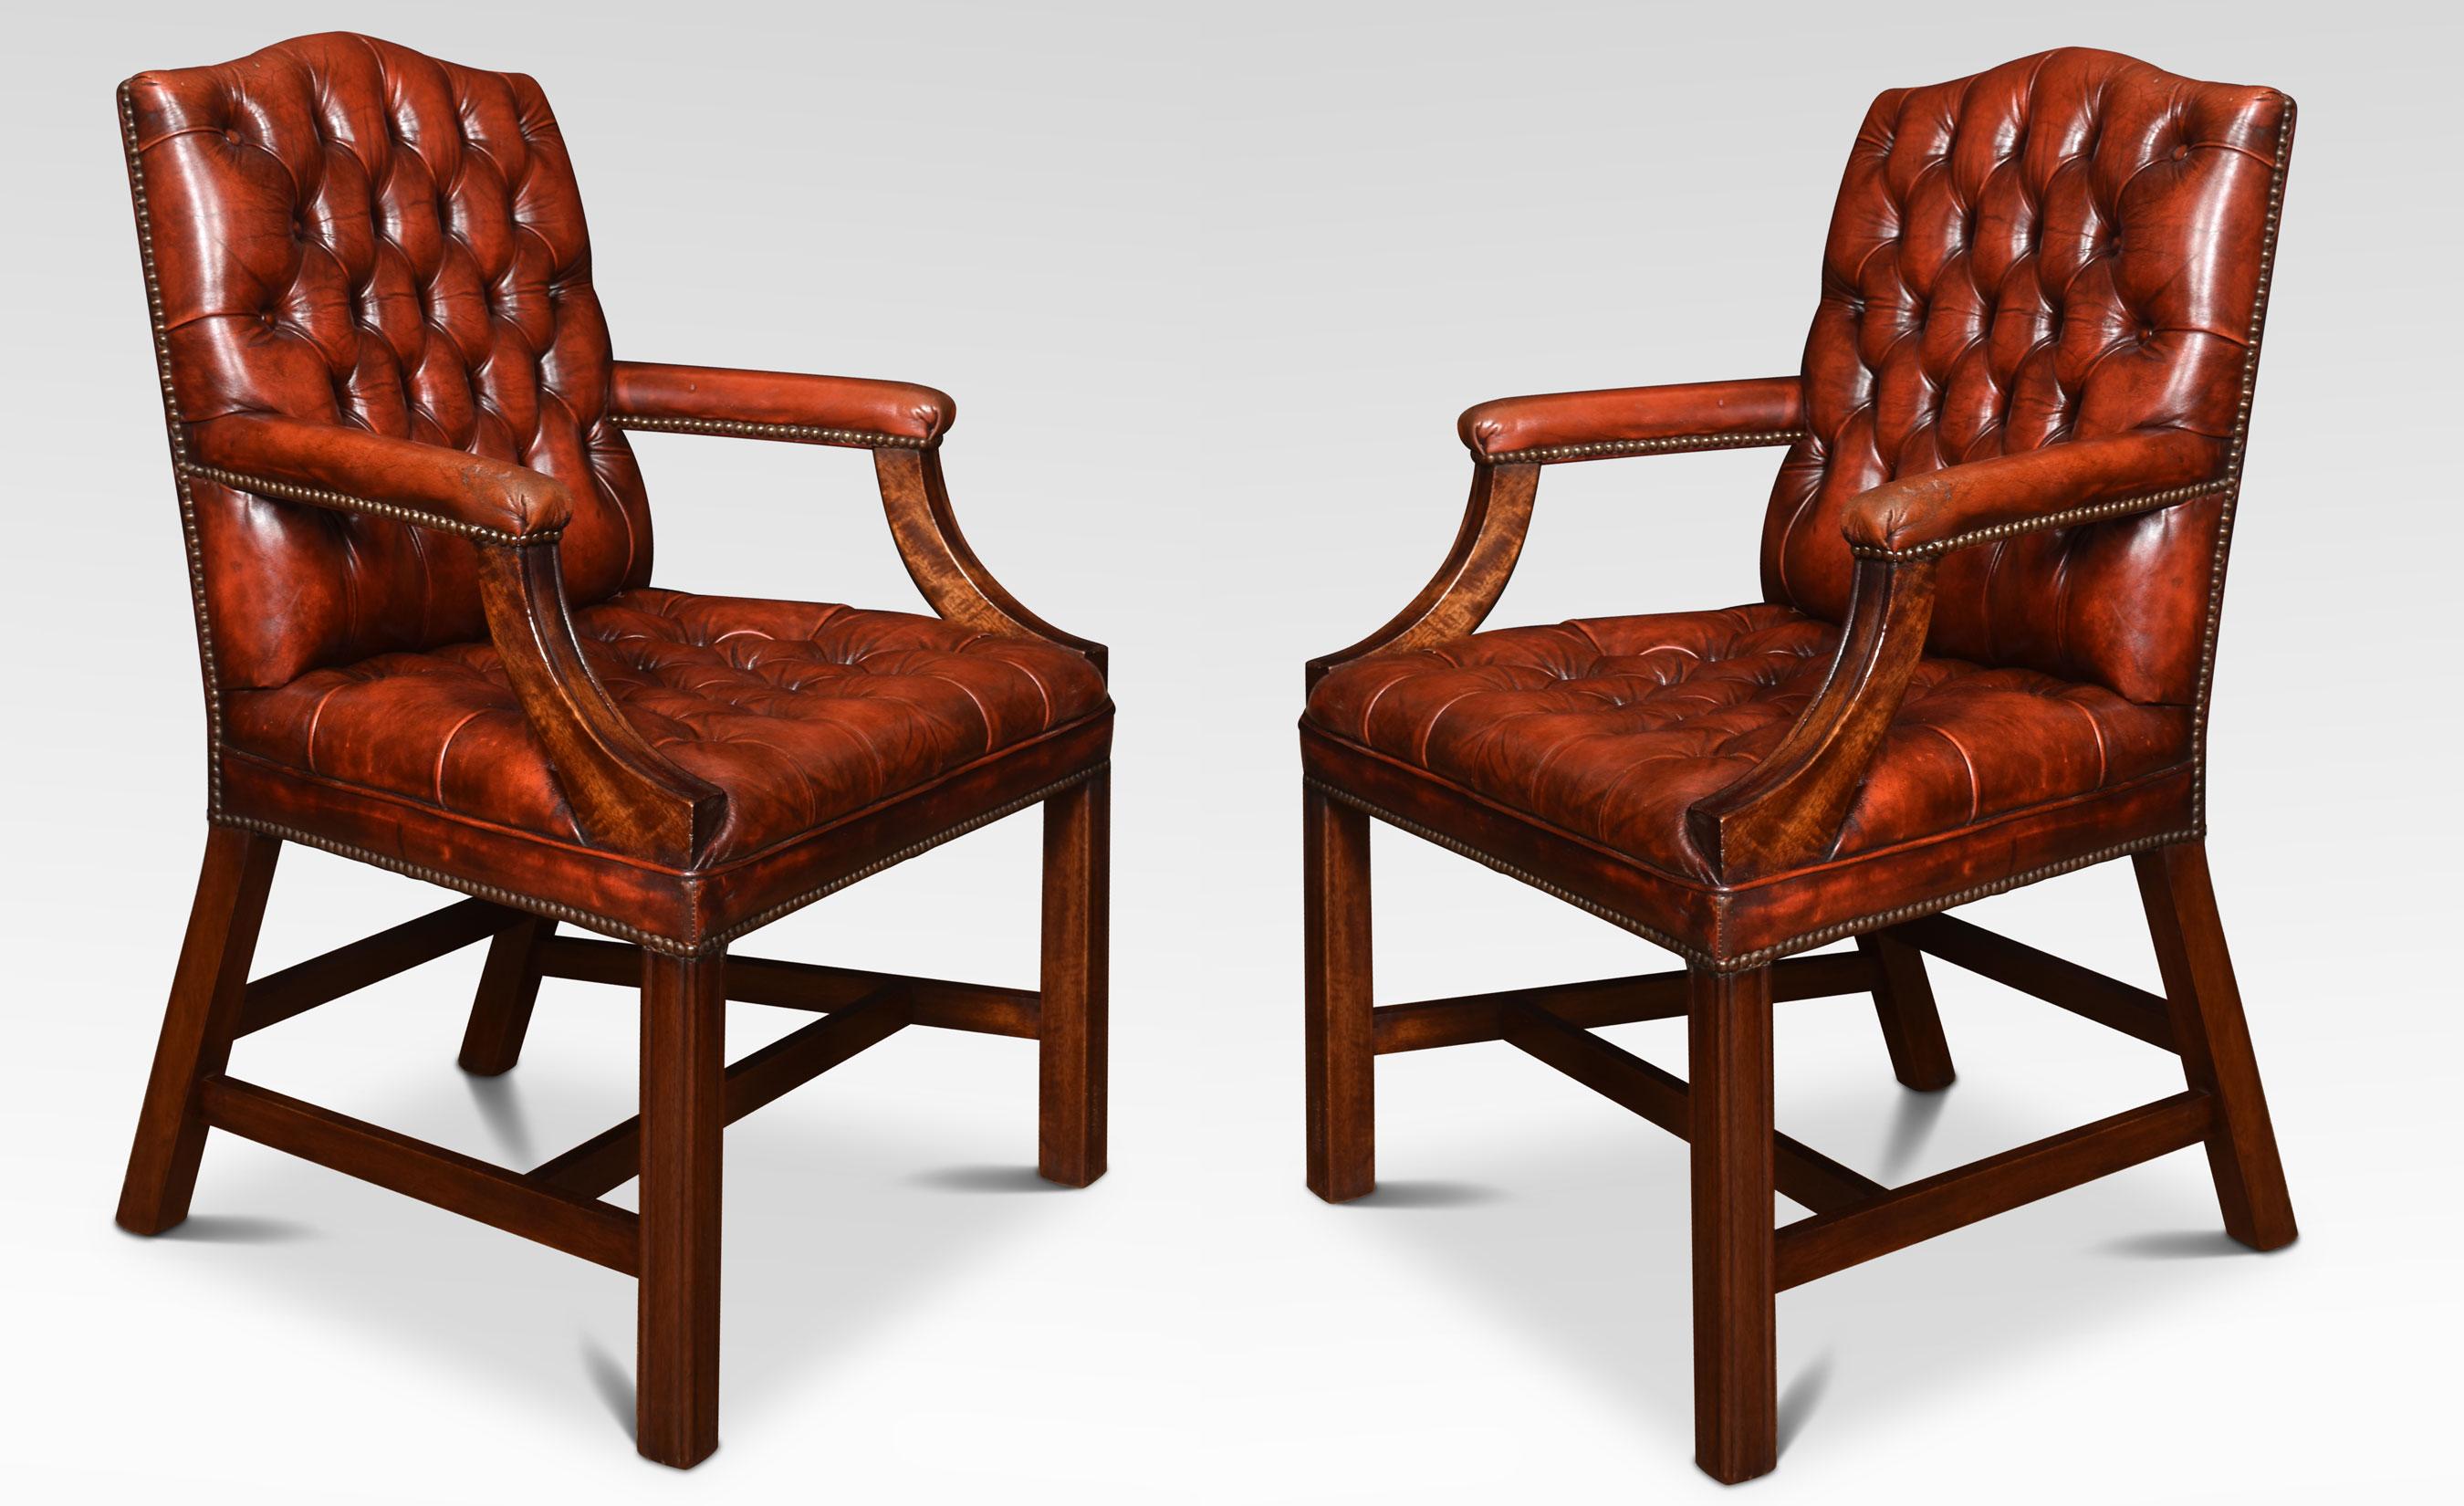 Pair Georgian style leather Gainsborough library chairs, having deep buttoned burgundy leather backs and seats with close-nailed edges. The solid walnut frame standing on square legs, united by stretcher.
Dimensions
Height 39.5 inches height to